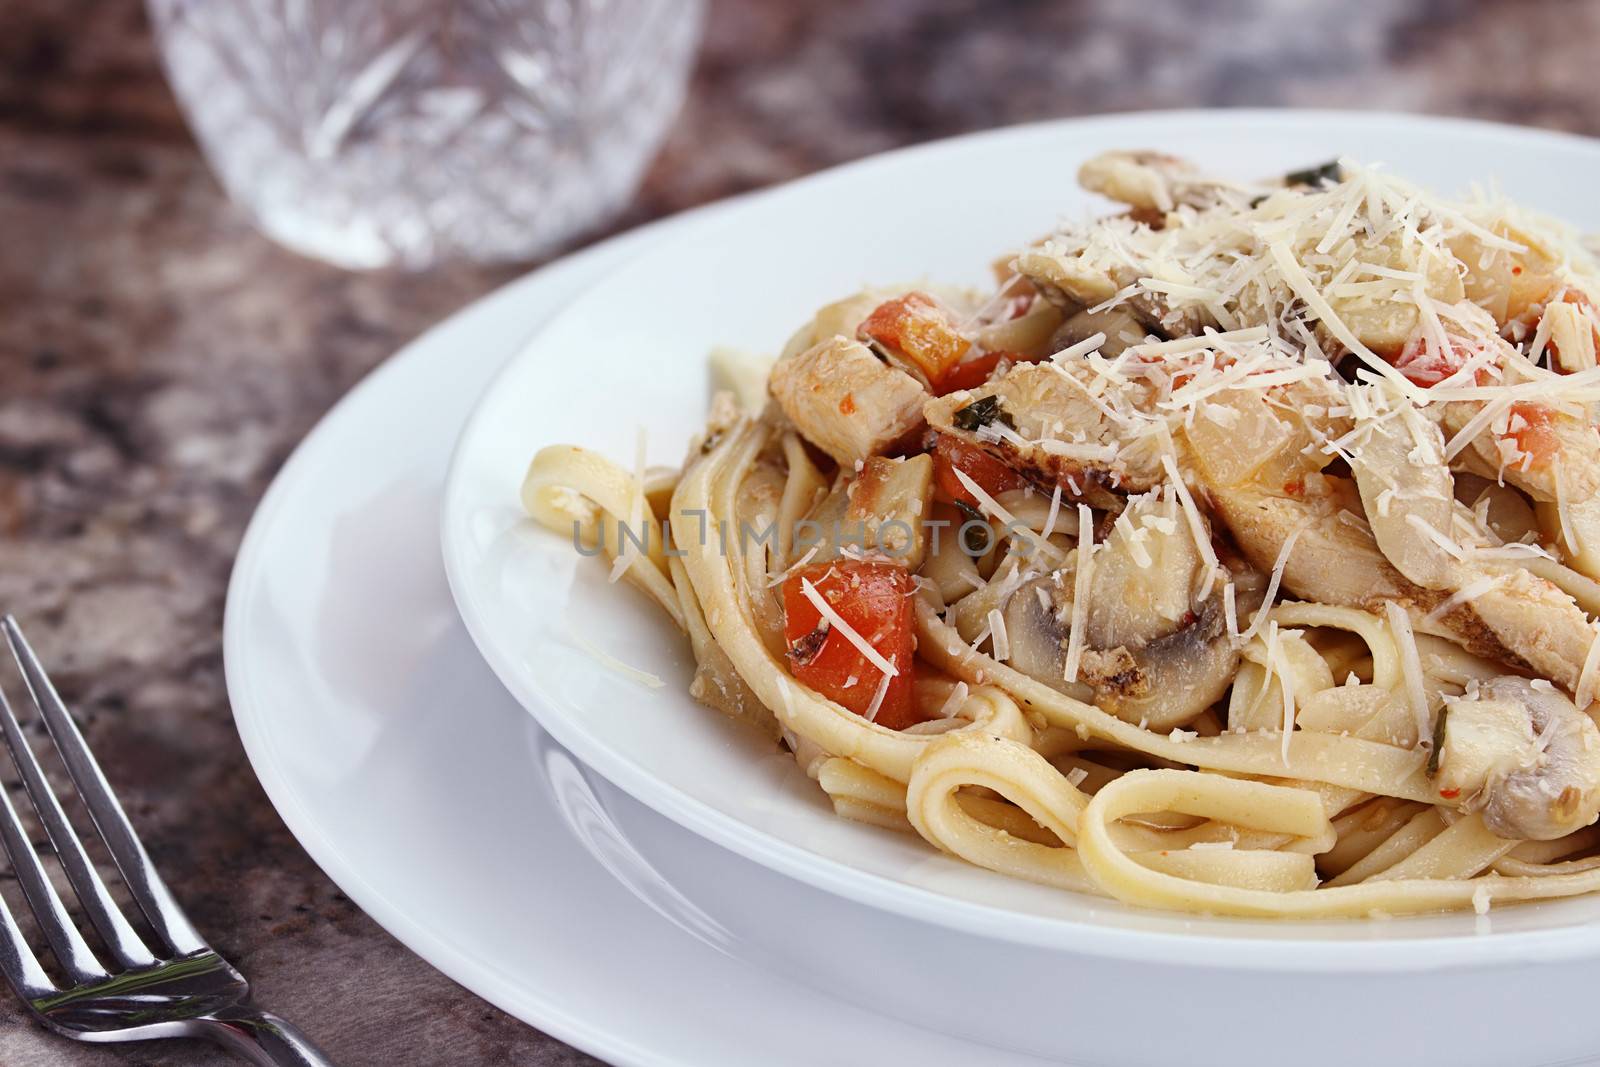 Chicken linguinie with grilled chicken, tomatoes, mushrooms and freshly grated parmesan cheese.